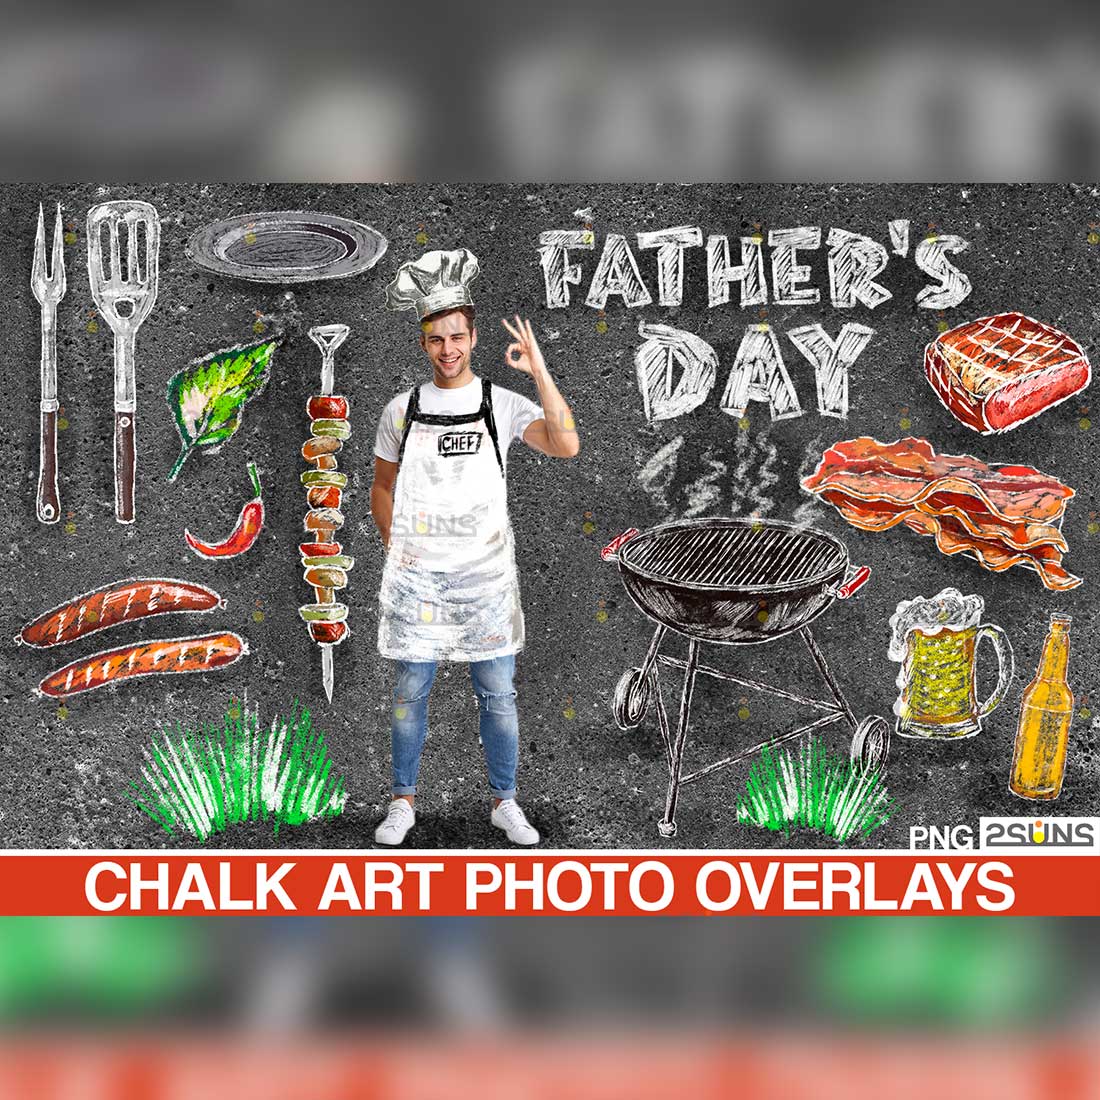 Fathers Day Sidewalk Chalk Art Overlay cover image.